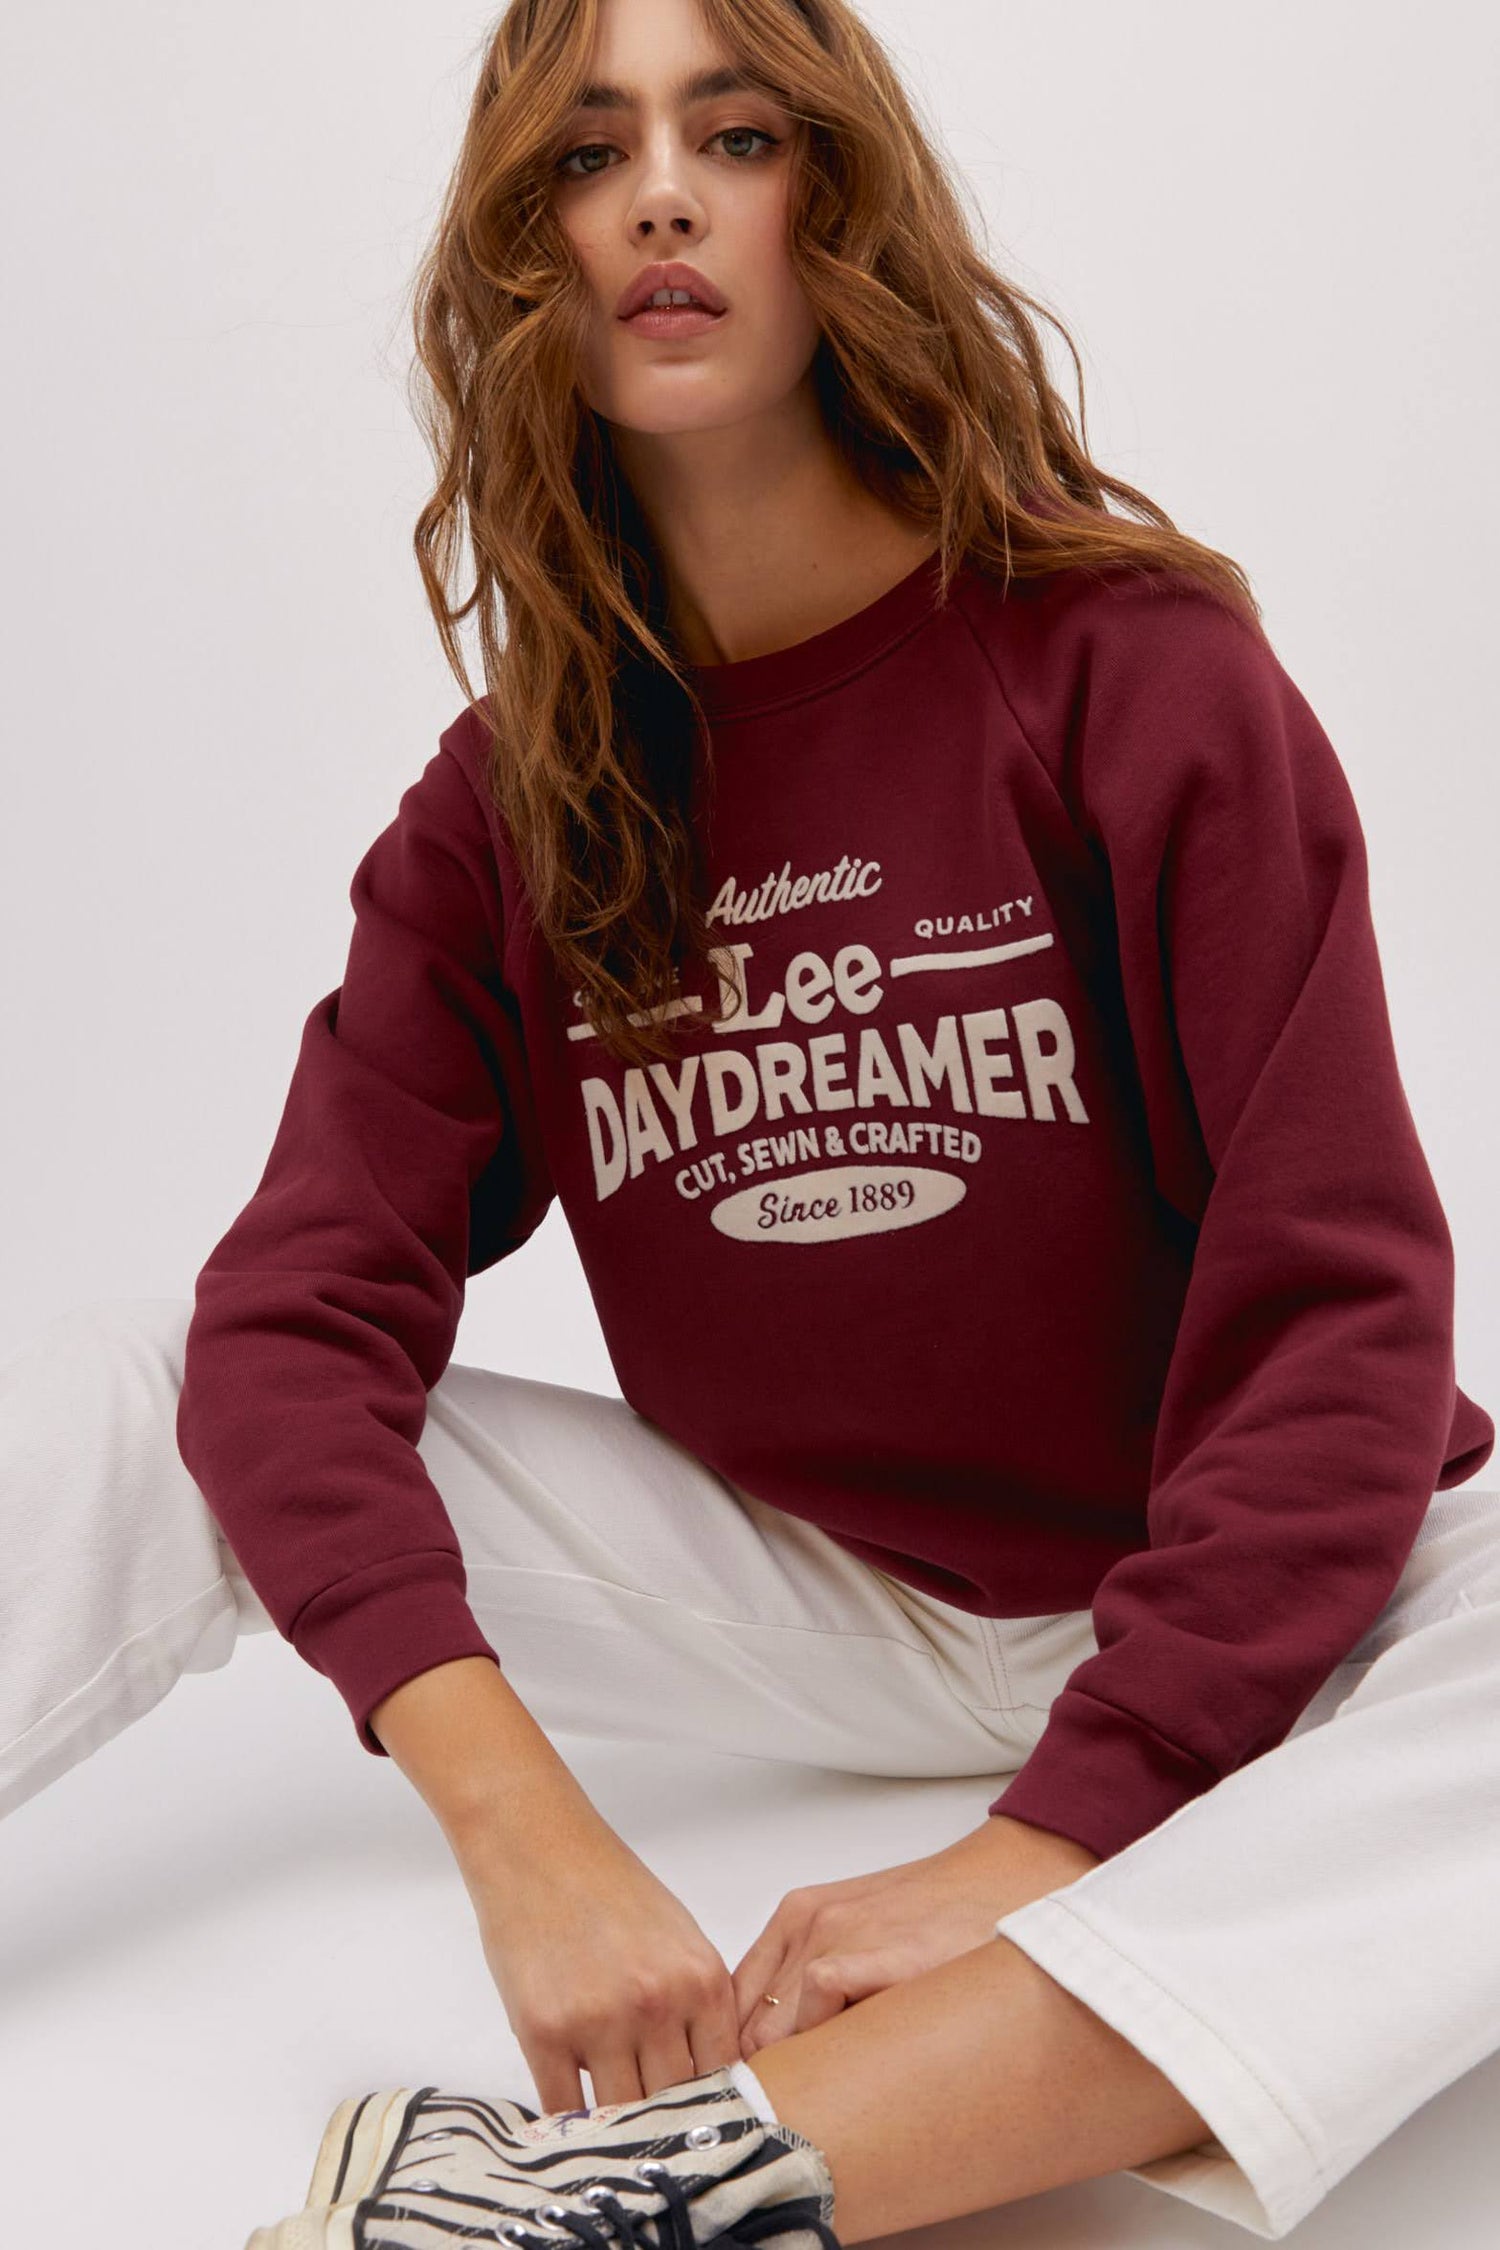 long wavy haired model in sitting pose wearing maroon colored sweatshirt and white workwear pants